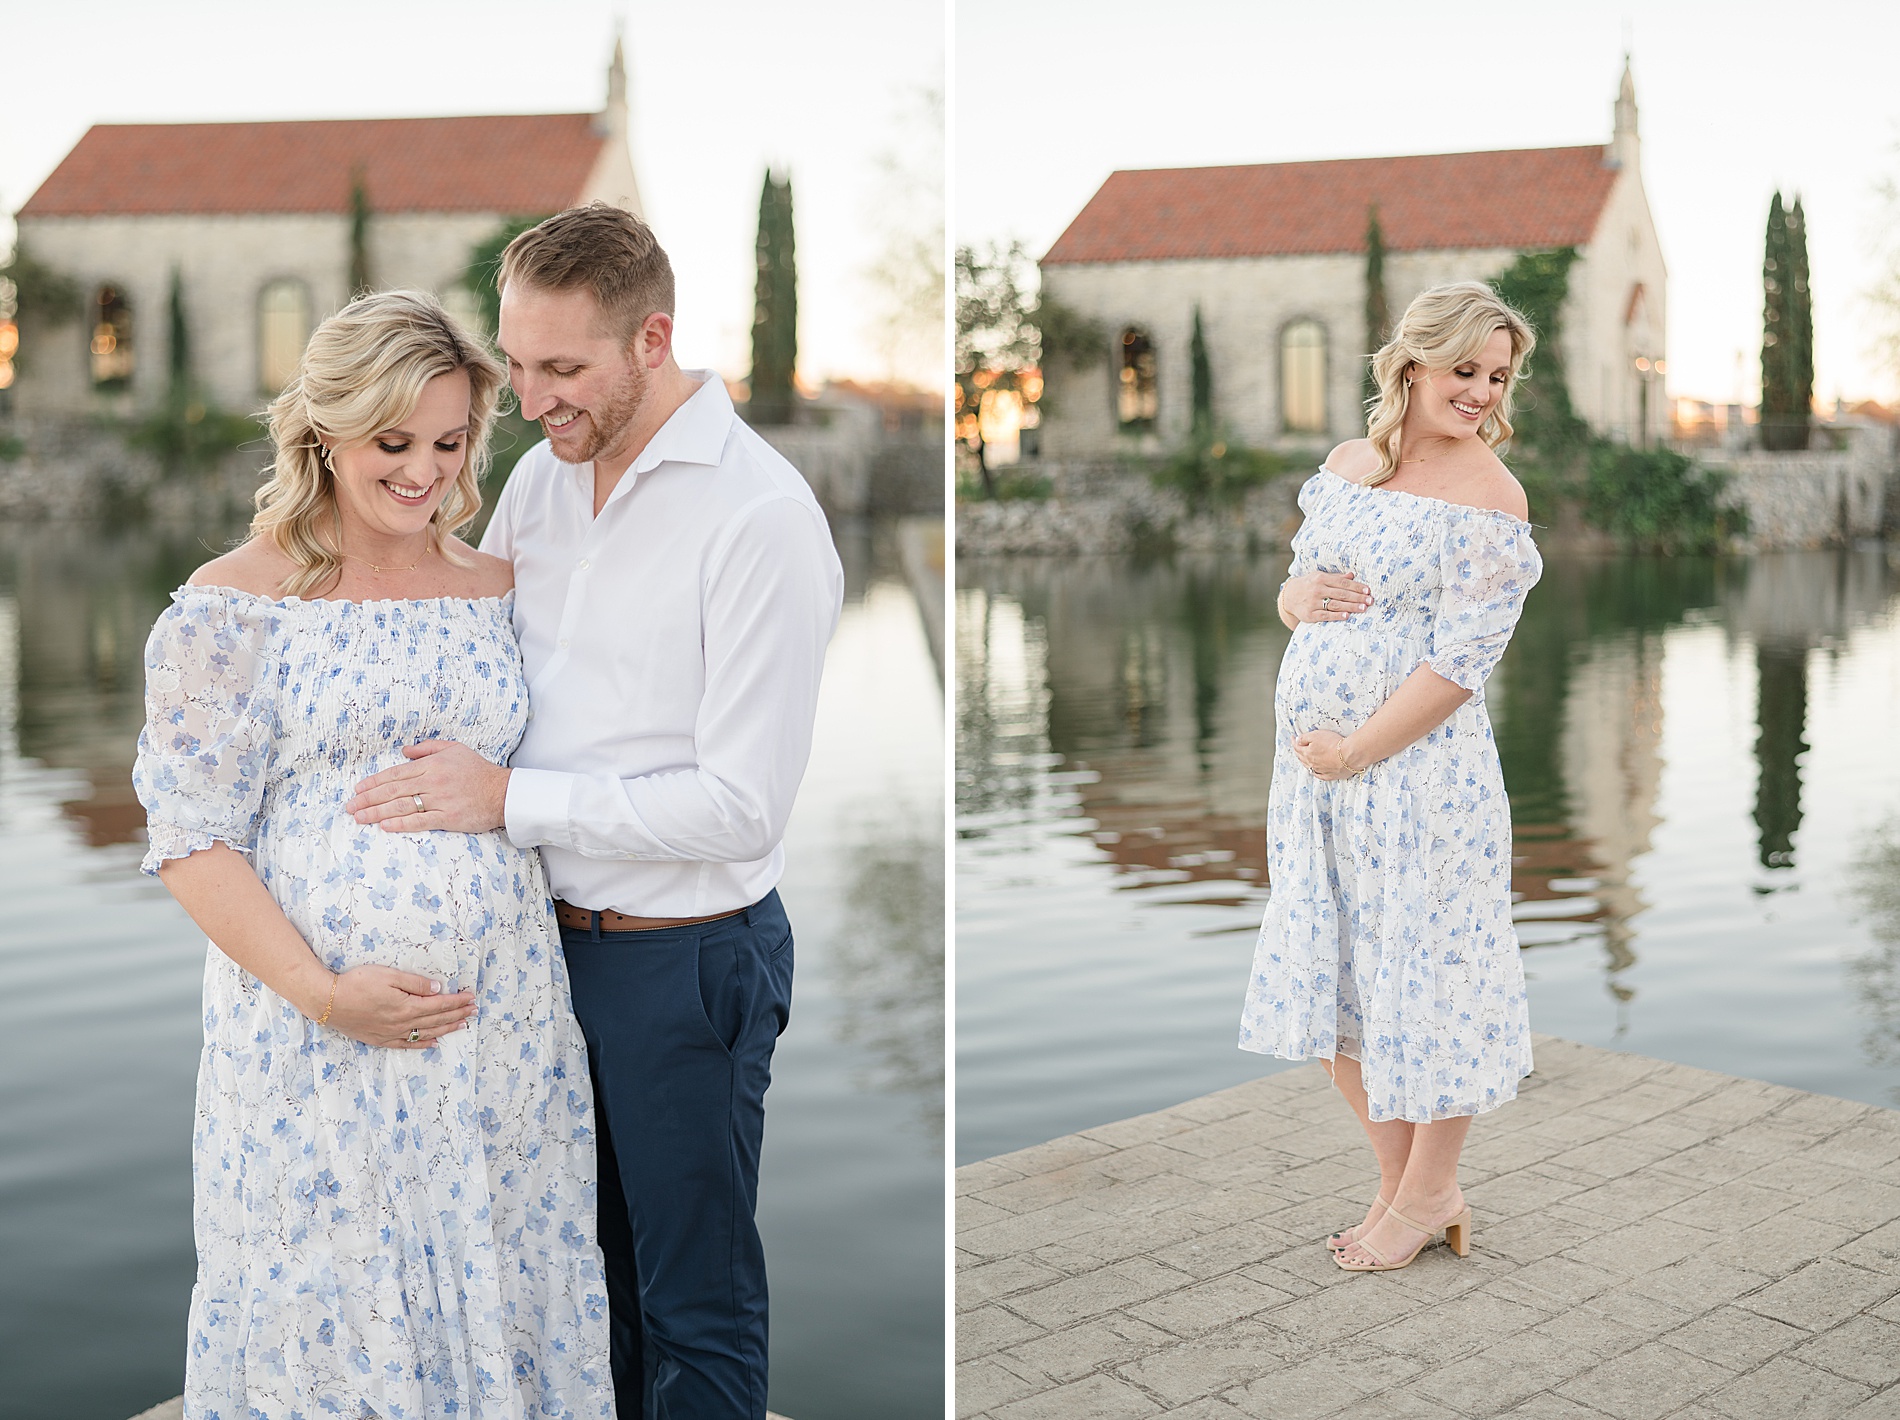 5 Reasons to Book Maternity Photos taken by Lindsey Dutton Photography, a Dallas Family photographer
